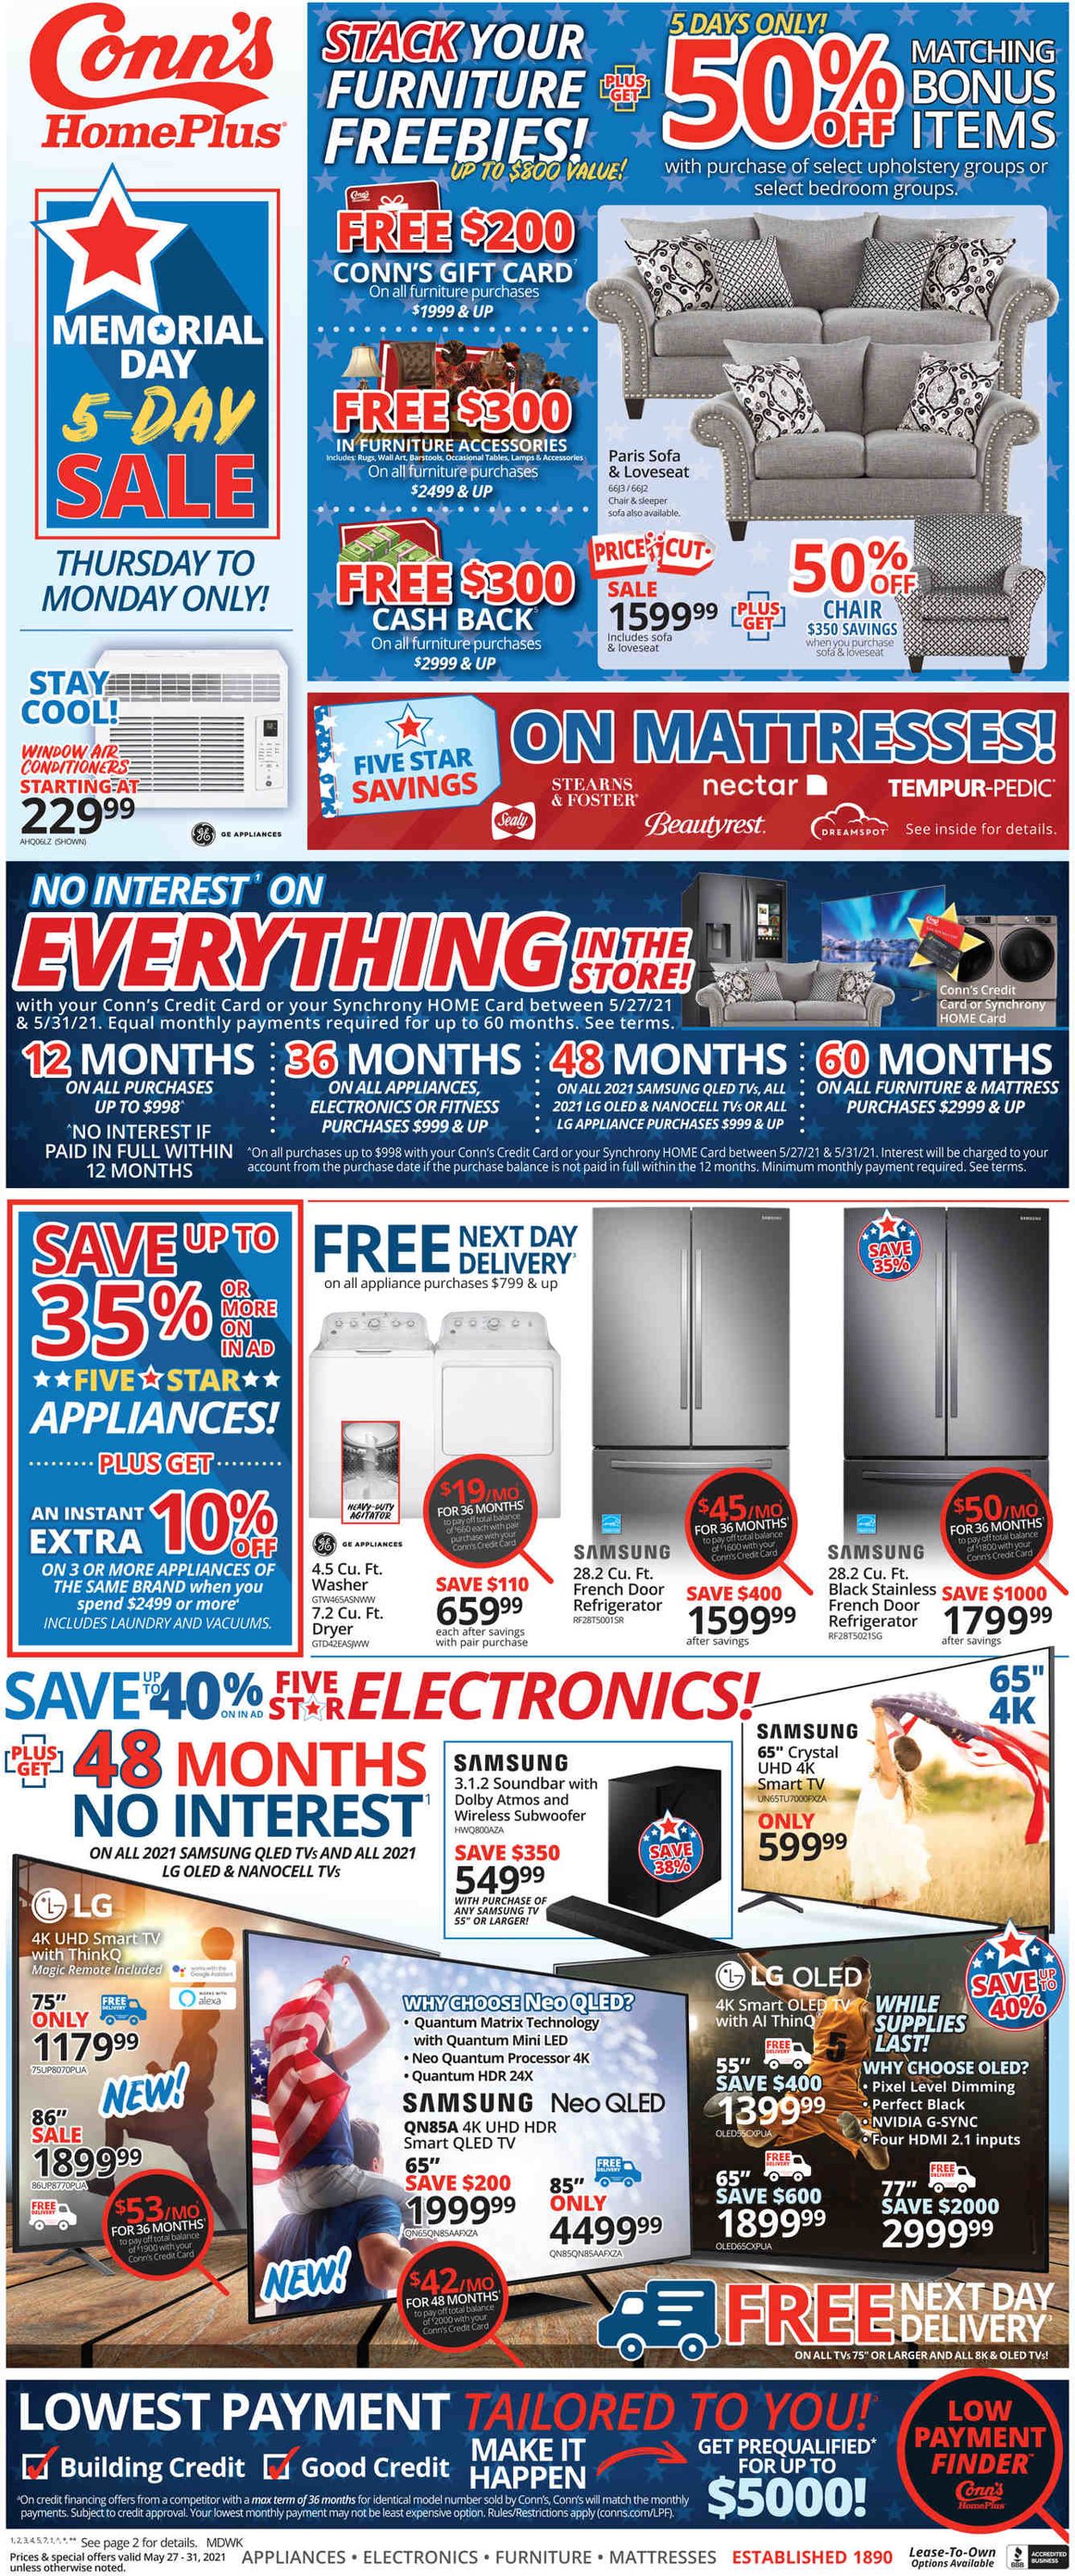 Conn's Home Plus Weekly Ad Circular - valid 05/27-05/31/2021